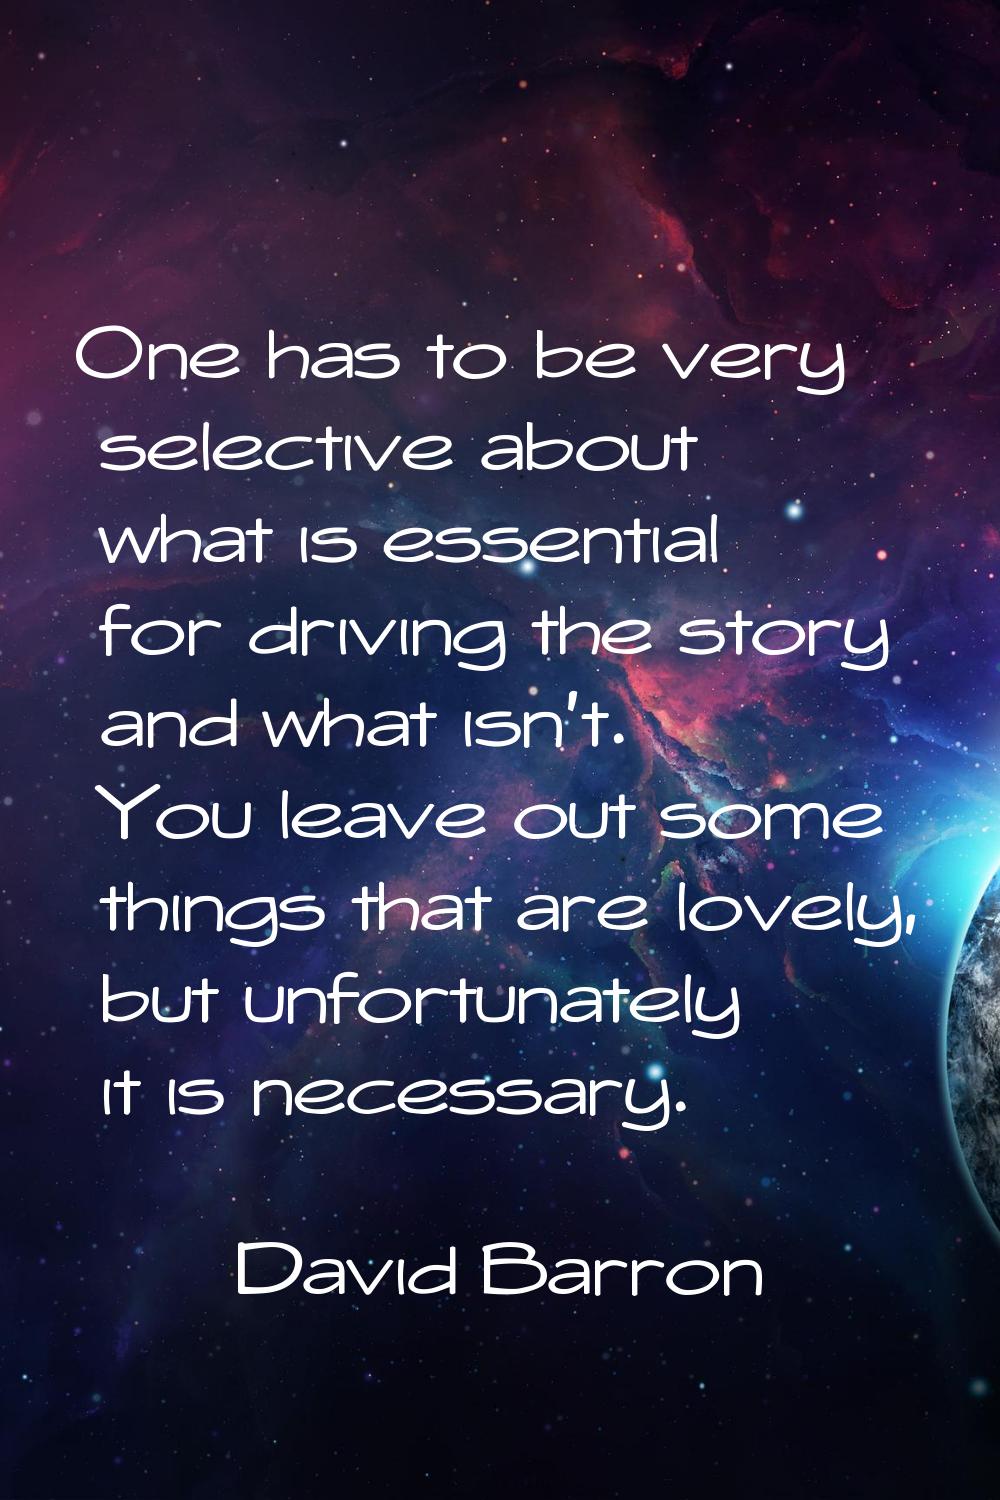 One has to be very selective about what is essential for driving the story and what isn't. You leav